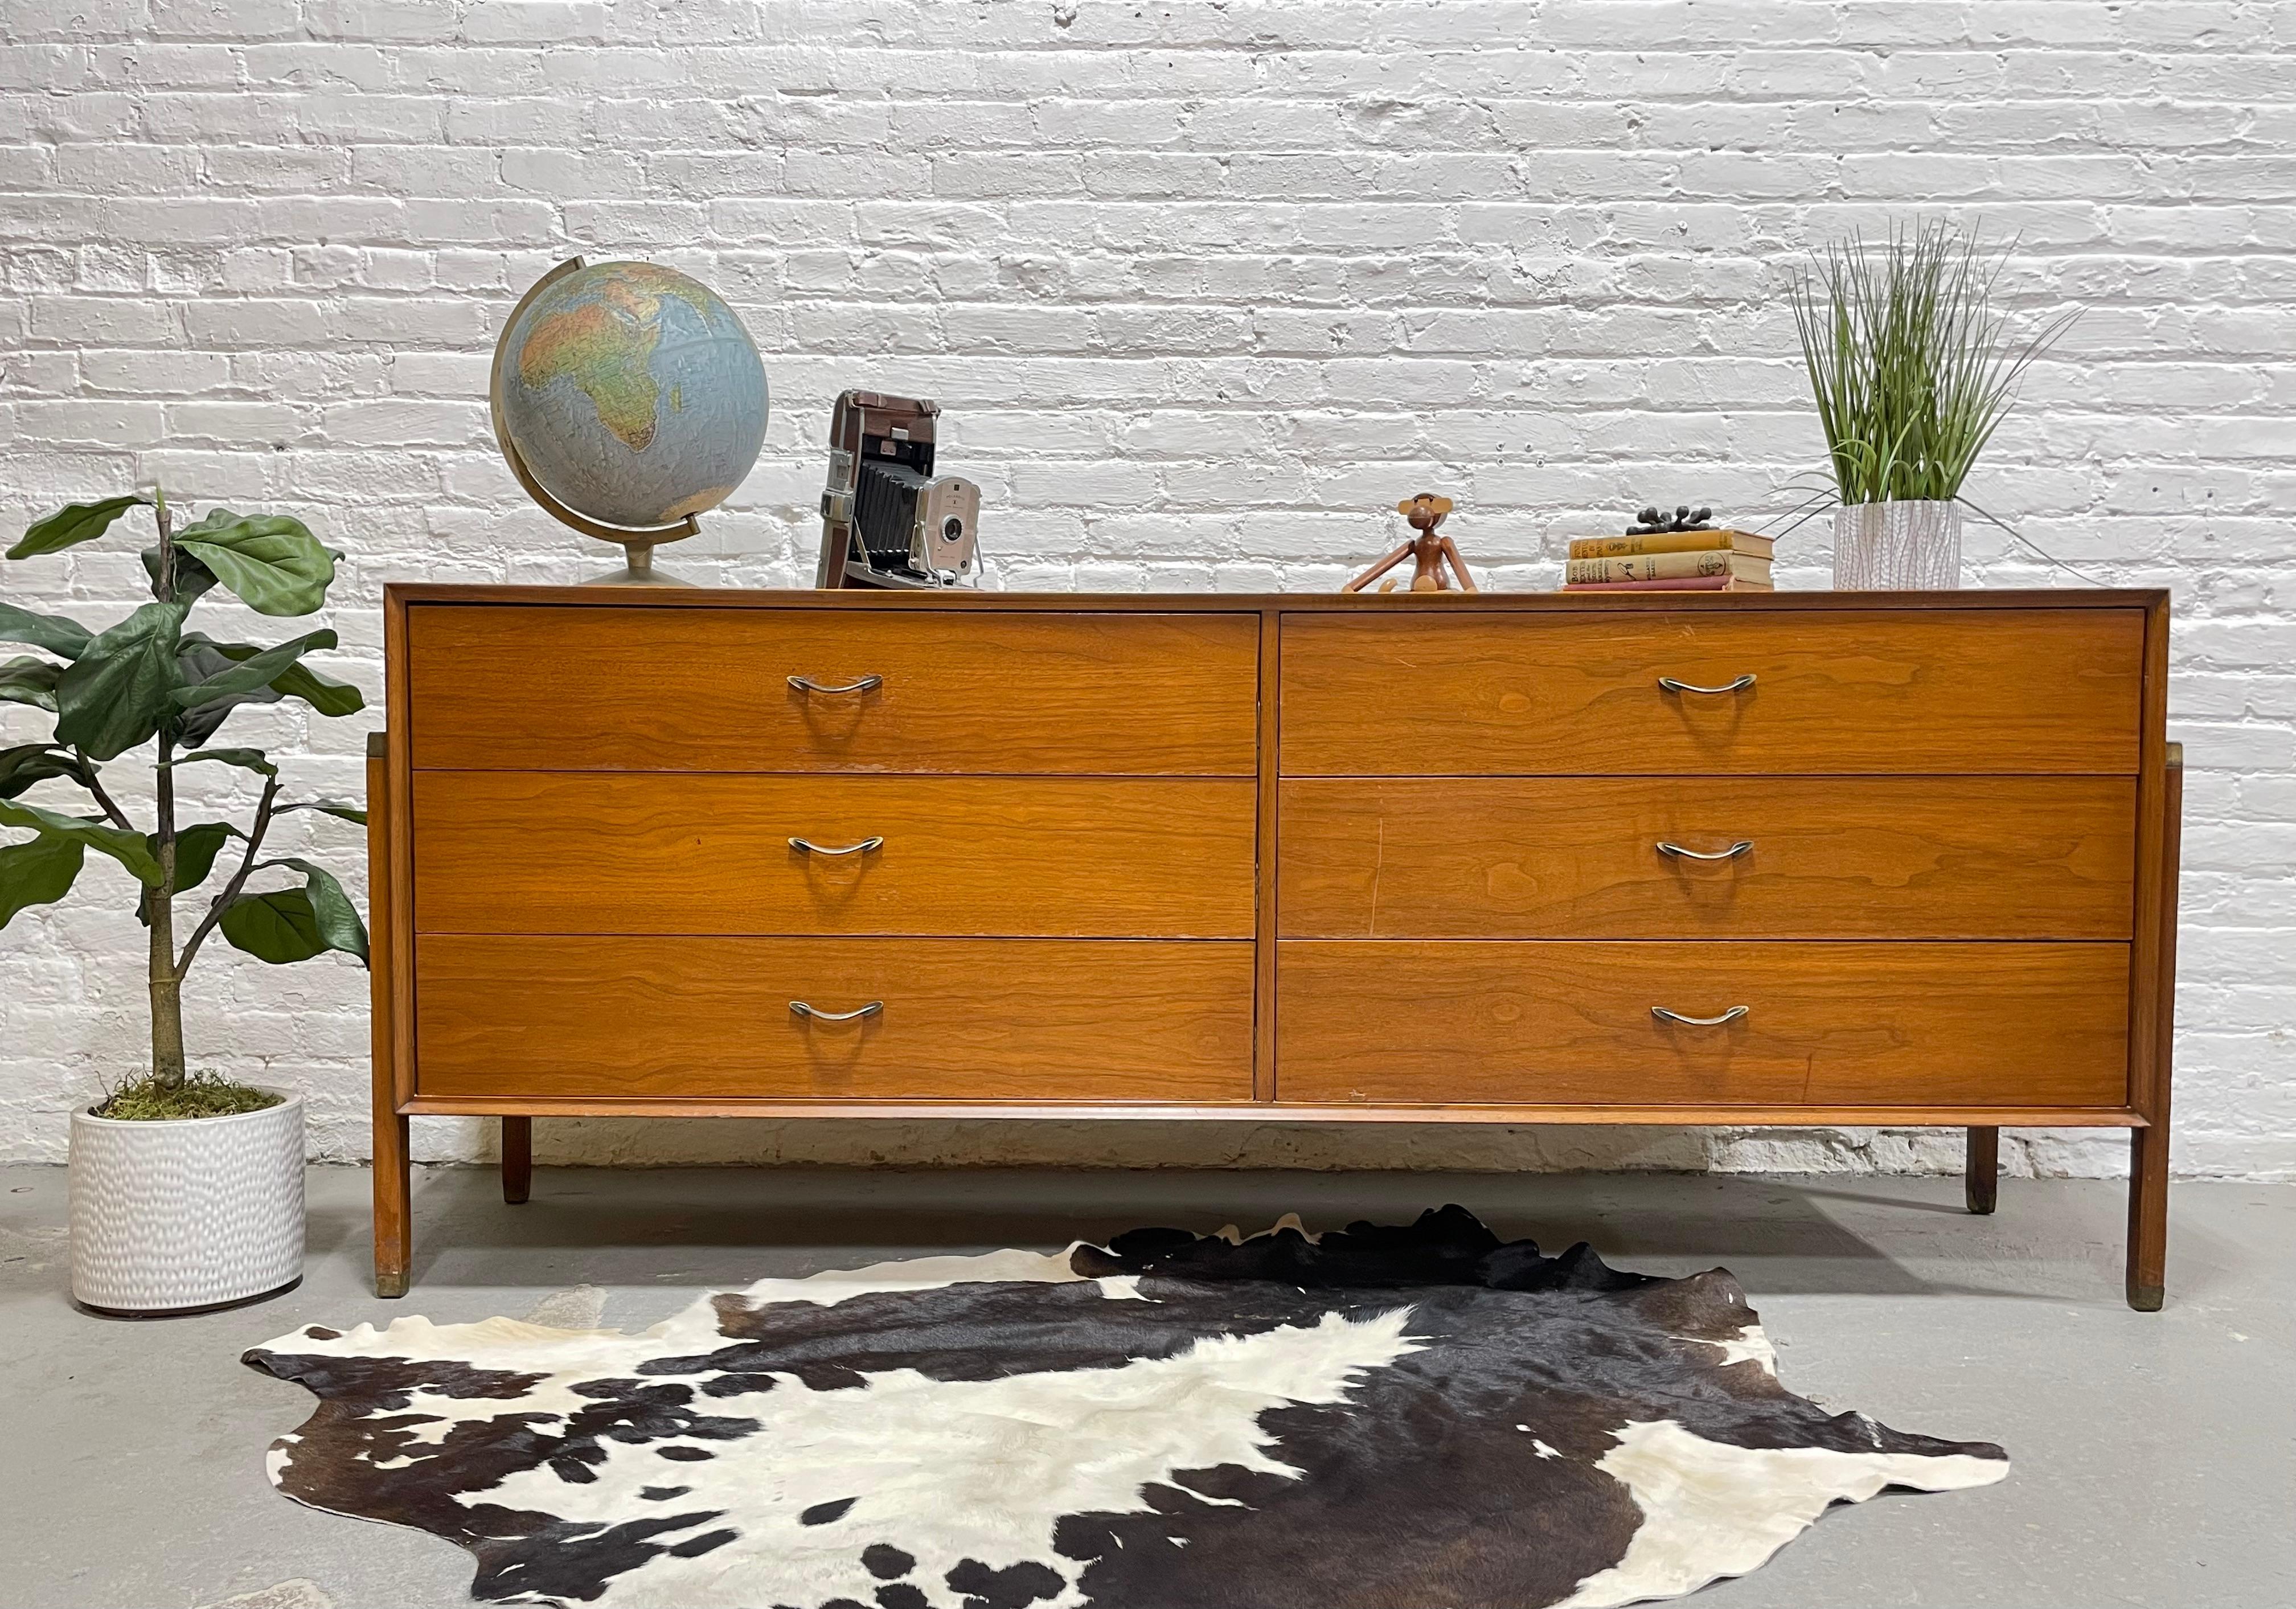 Mid Century Modern Walnut Long Dresser / Credenza in the style of Dunbar, c. 1960’s.  This long credenza is highlighted by legs that are attached along the sides, giving the credenza a floating appearance. The legs are topped and capped with brass